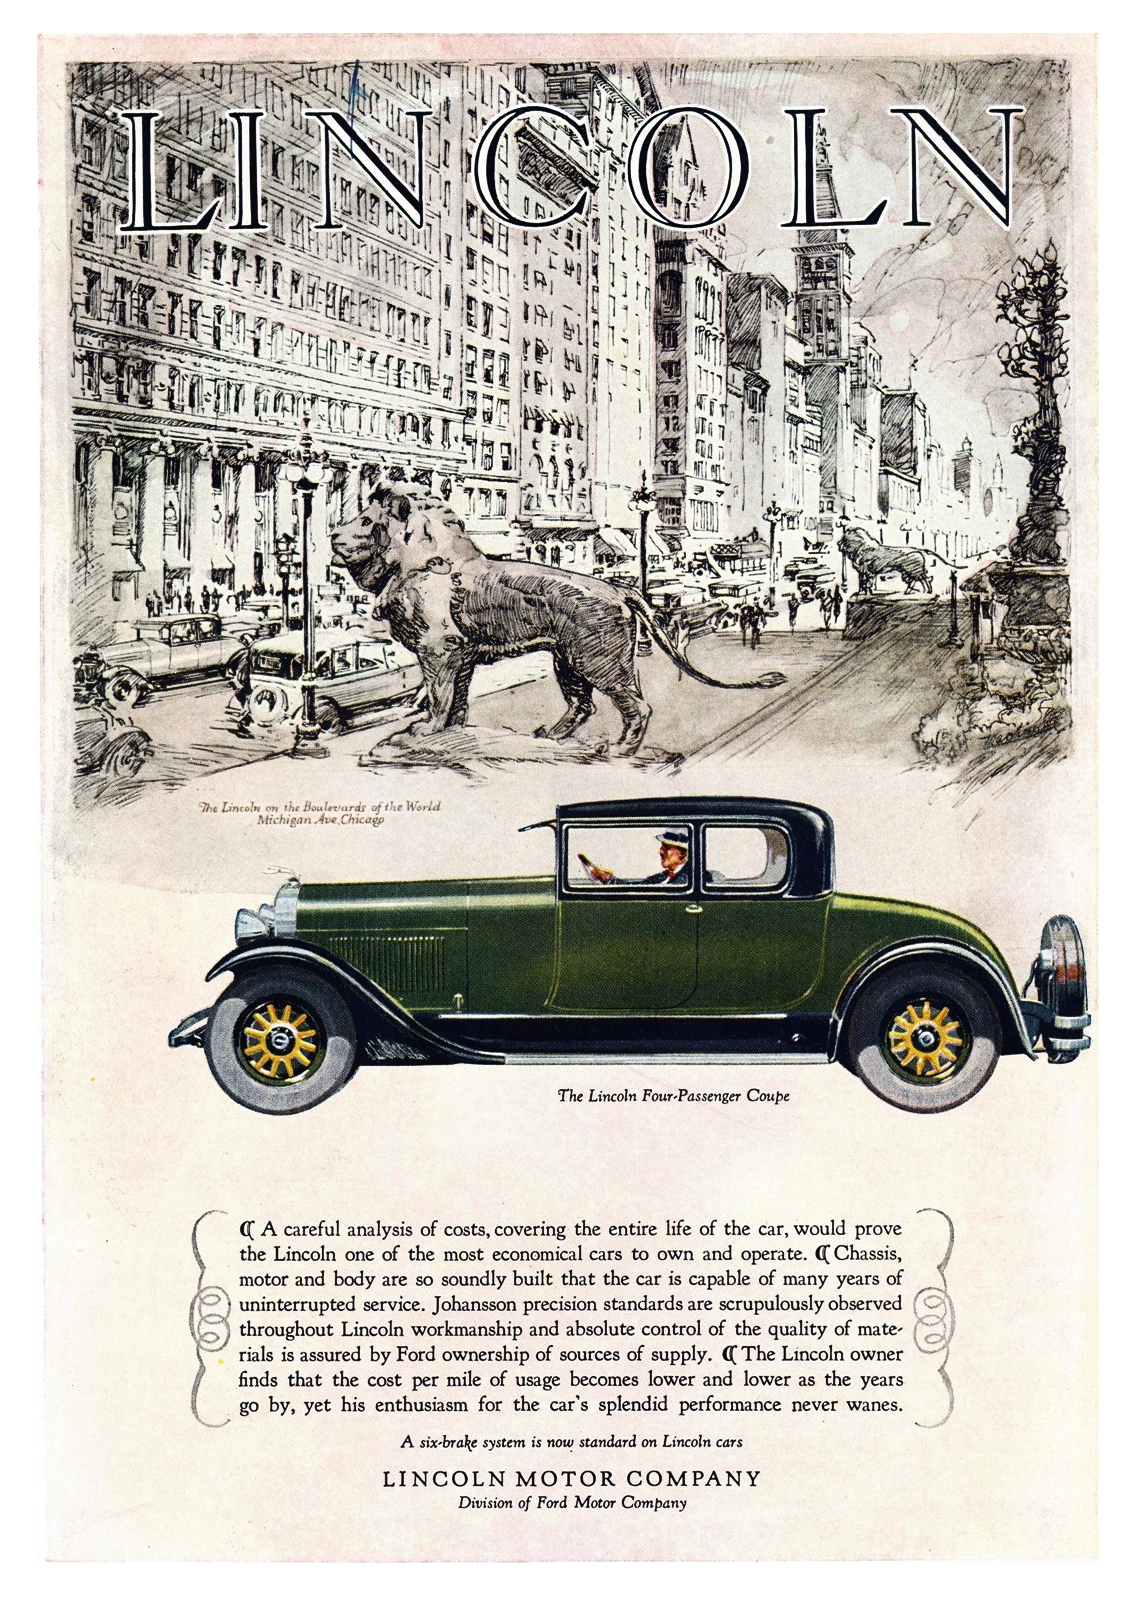 Lincoln Four-Passenger Coupe Ad (May, 1927) – Michigan Avenue, Chicago